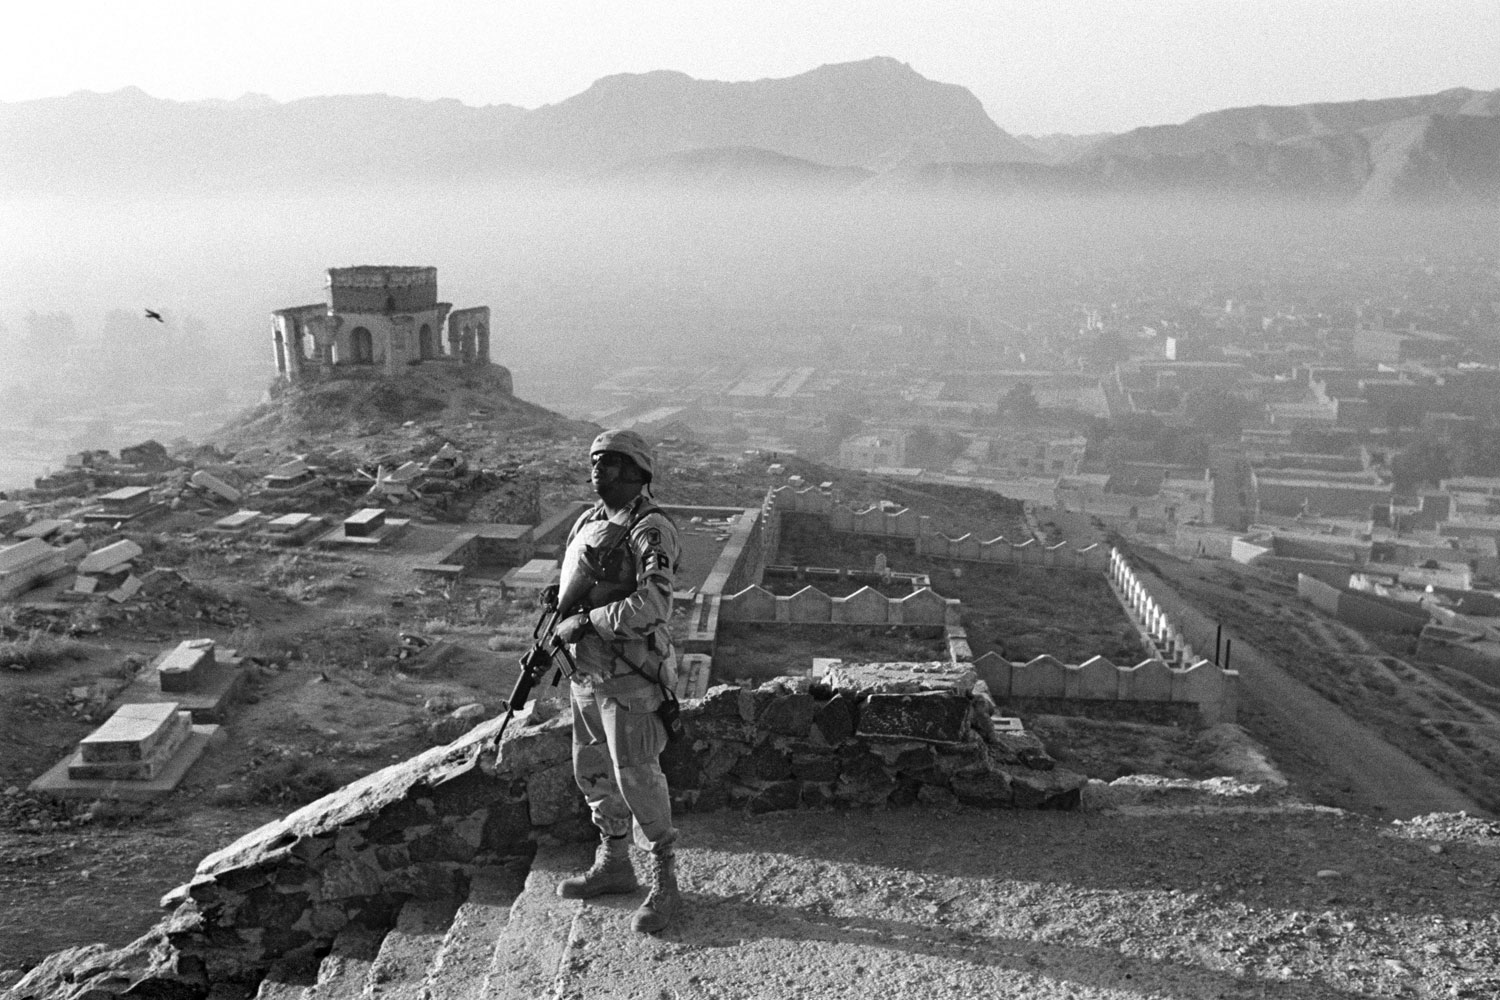 Abbas, September 2005
                               A GI on patrol in Kabul seems lost among the ruins overlooking the capital, shrouded in the mist of dawn. Are these ruins historical or the result of recent battles? What  is an armed African-American soldier doing in a Central Asian city? What invisible enemy is he guarding against?   The photo is a symbol of America’s presence in Afghanistan. It reminds me of the film The Desert of the Tartars.